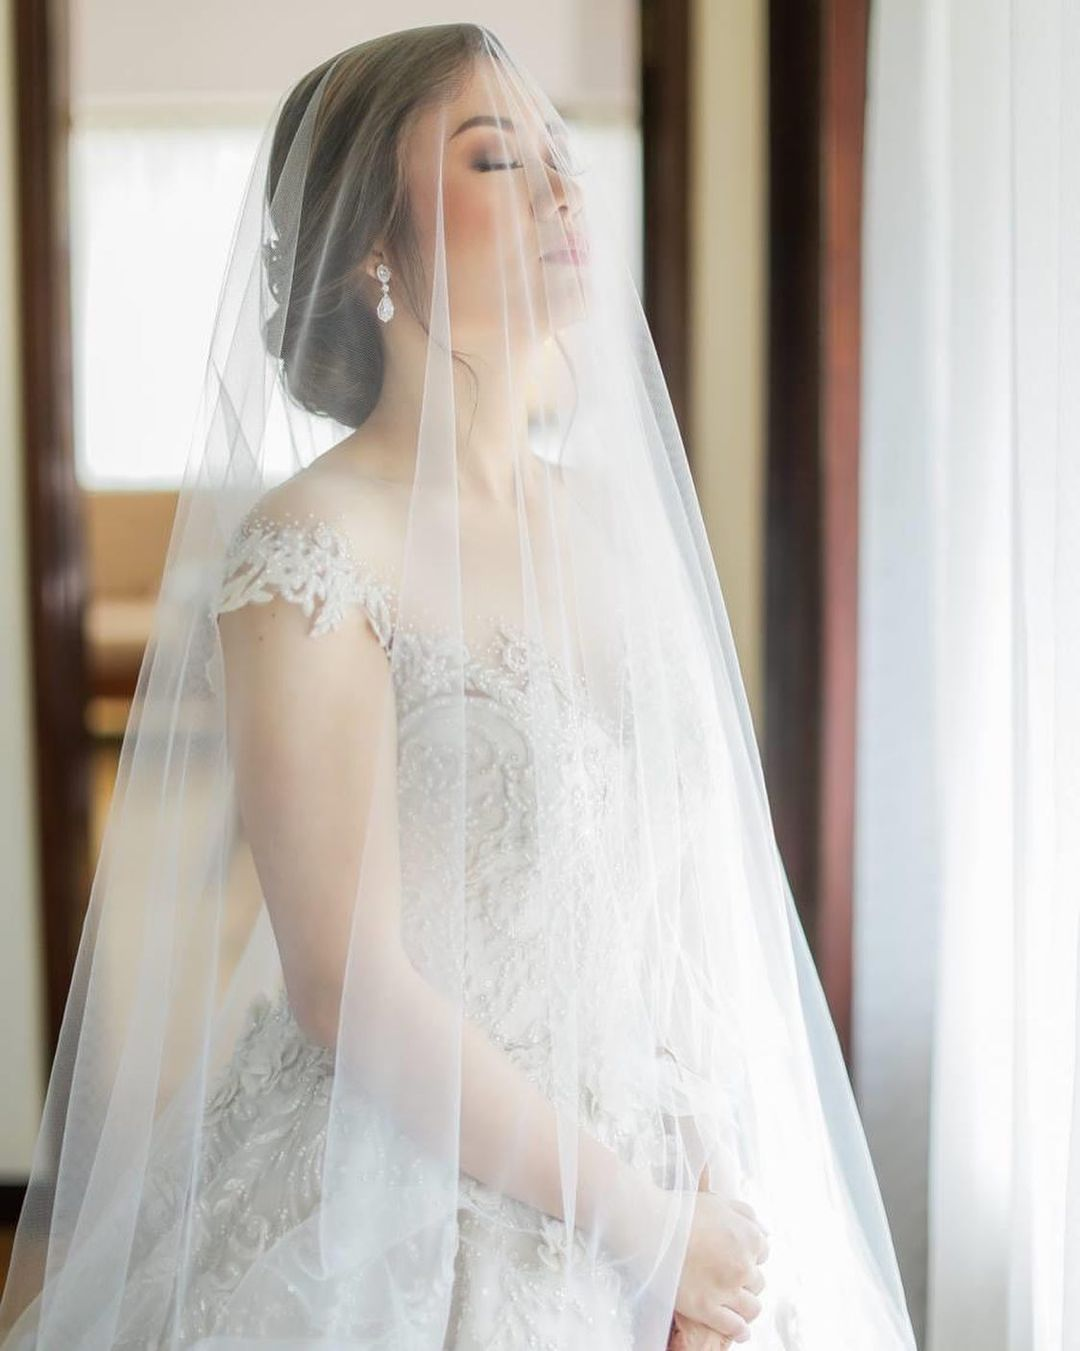 Philippines weddings - white gown